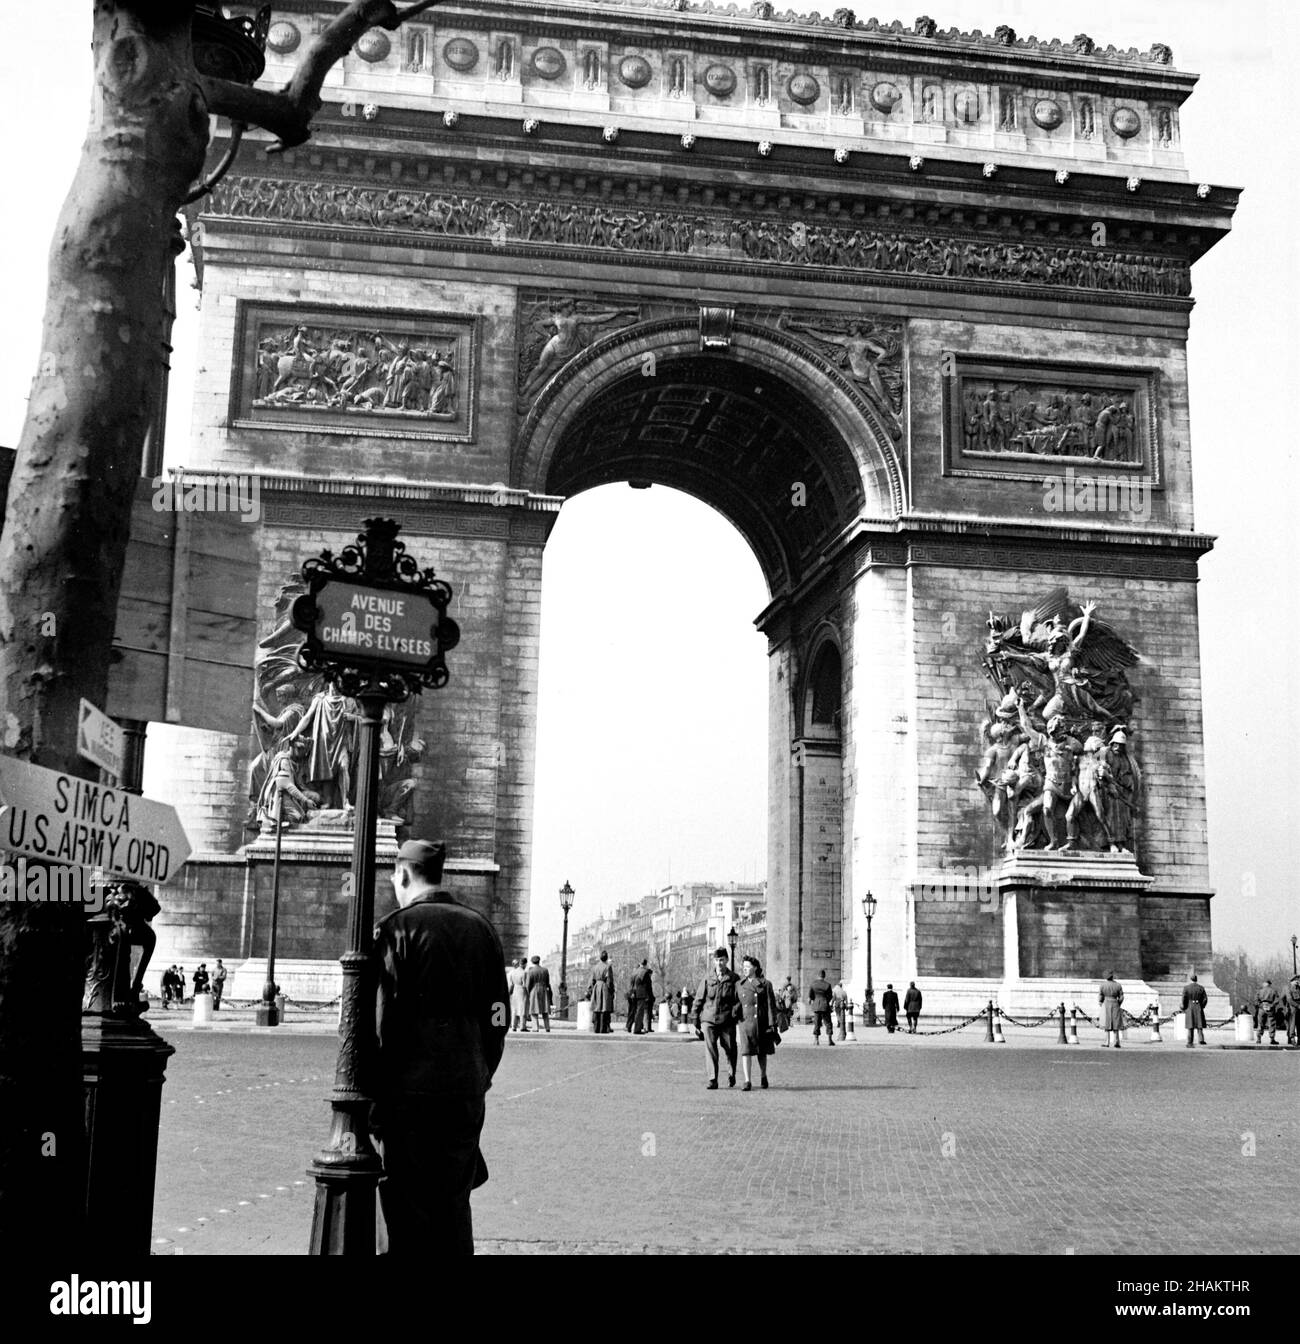 Paris Arc de Triomphe at Place de l Etoile and Champs-Elysees with no  vehicles, 1945. The iconic arch takes up most of the square image. Place de  l Etoile looks more like